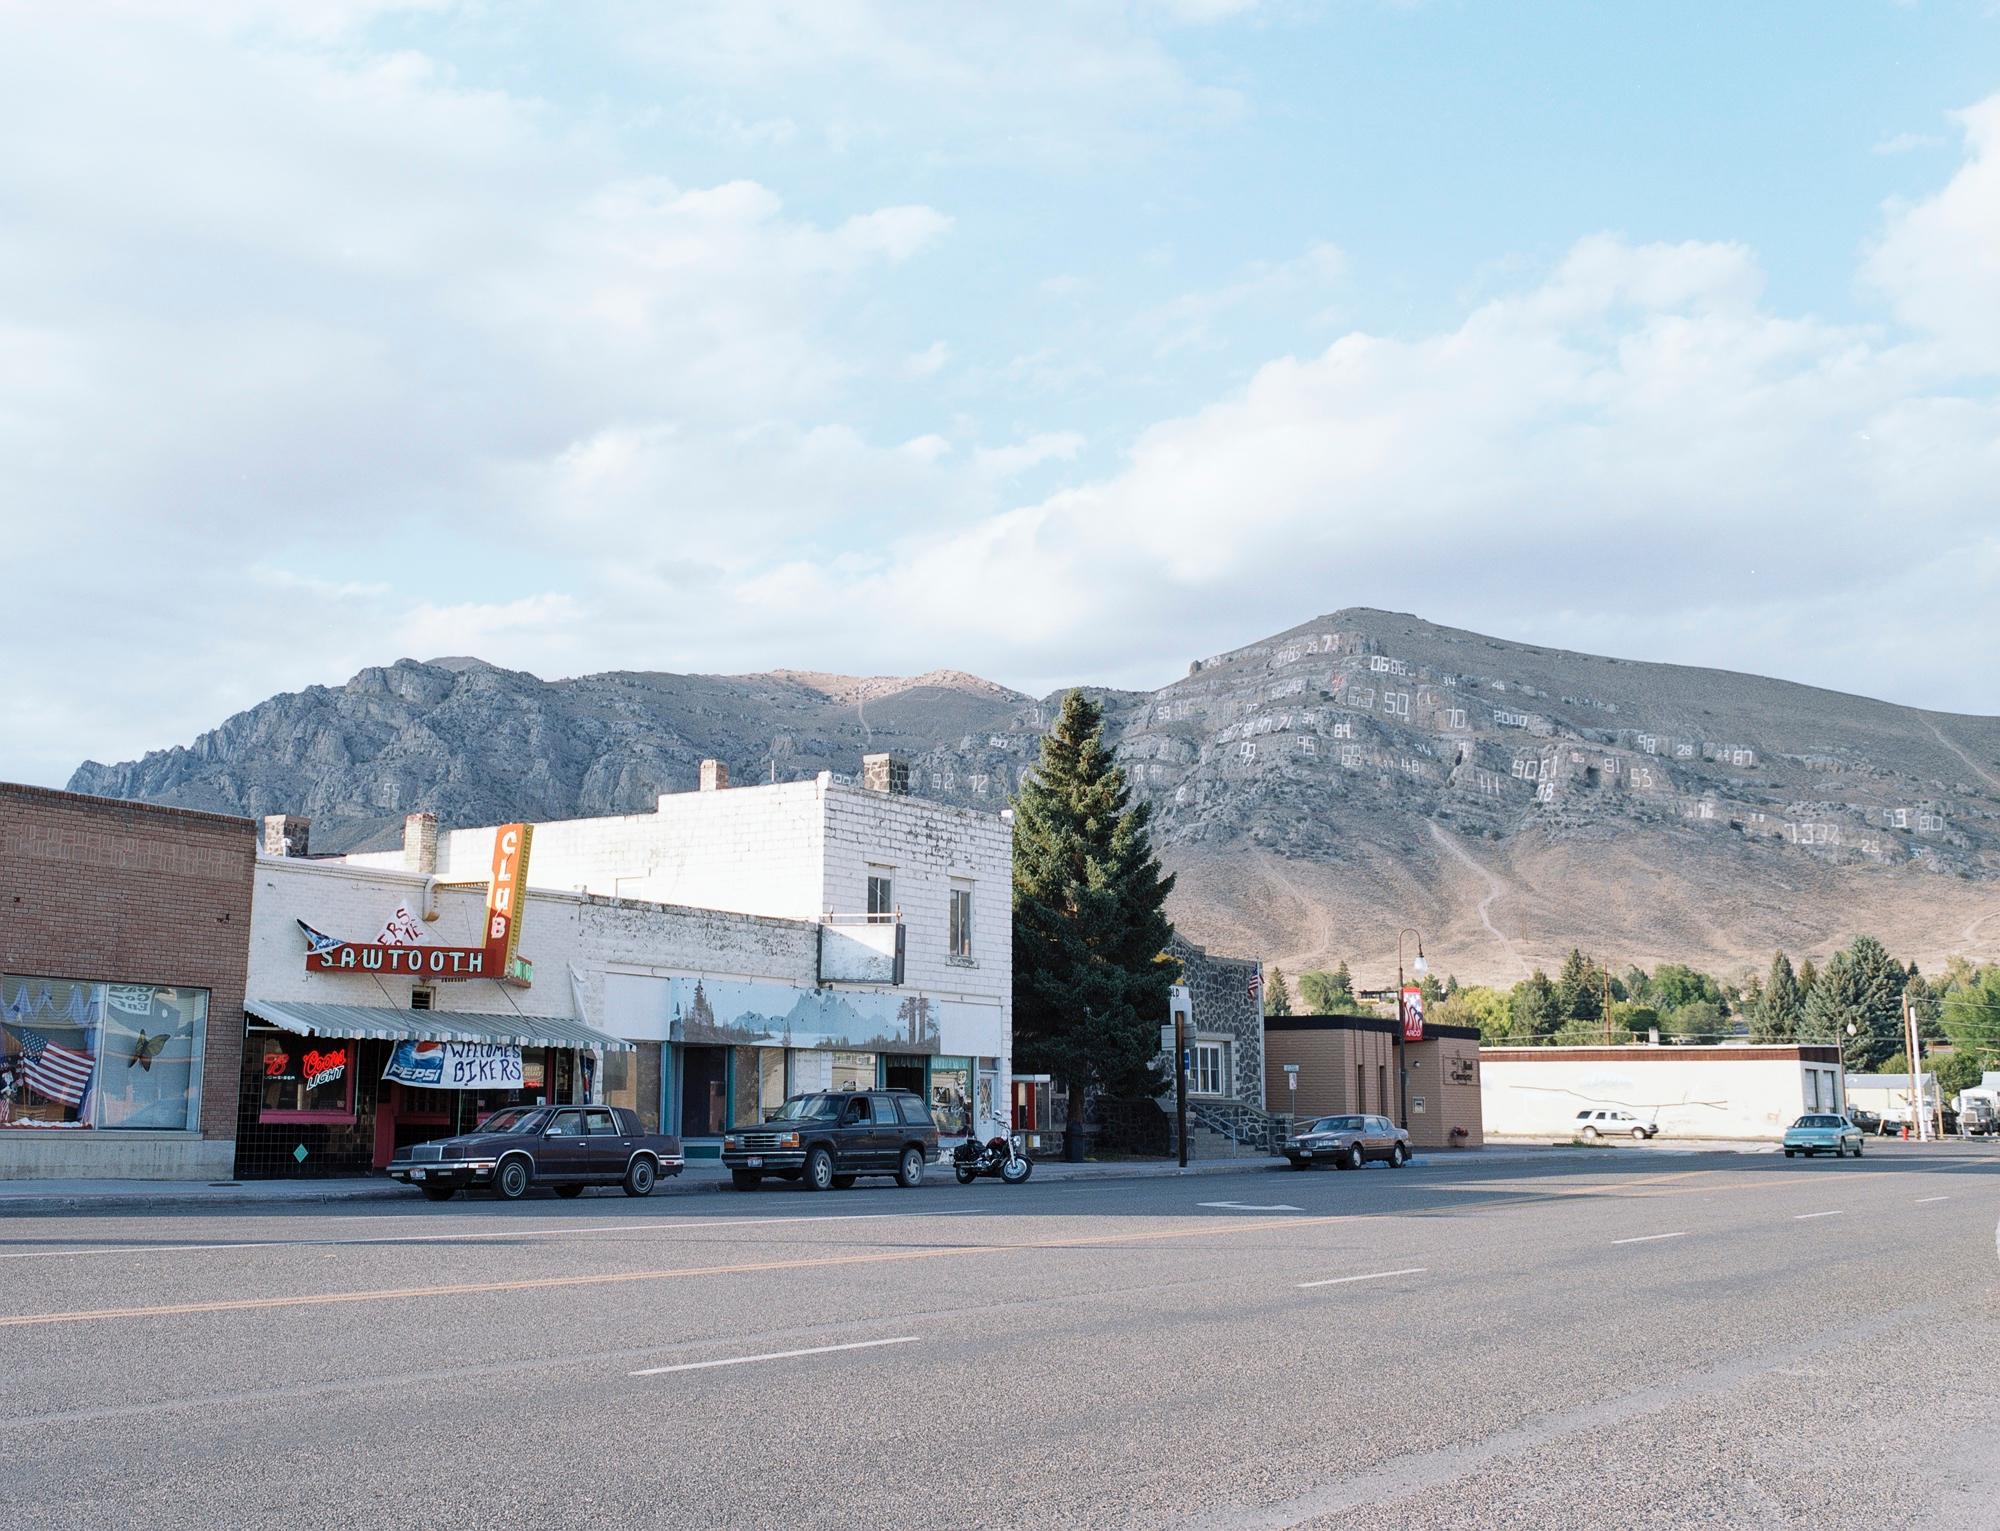 Maria Passarotti Color Photograph - Number Hill, small western town, contemporary documentary photography, landscape